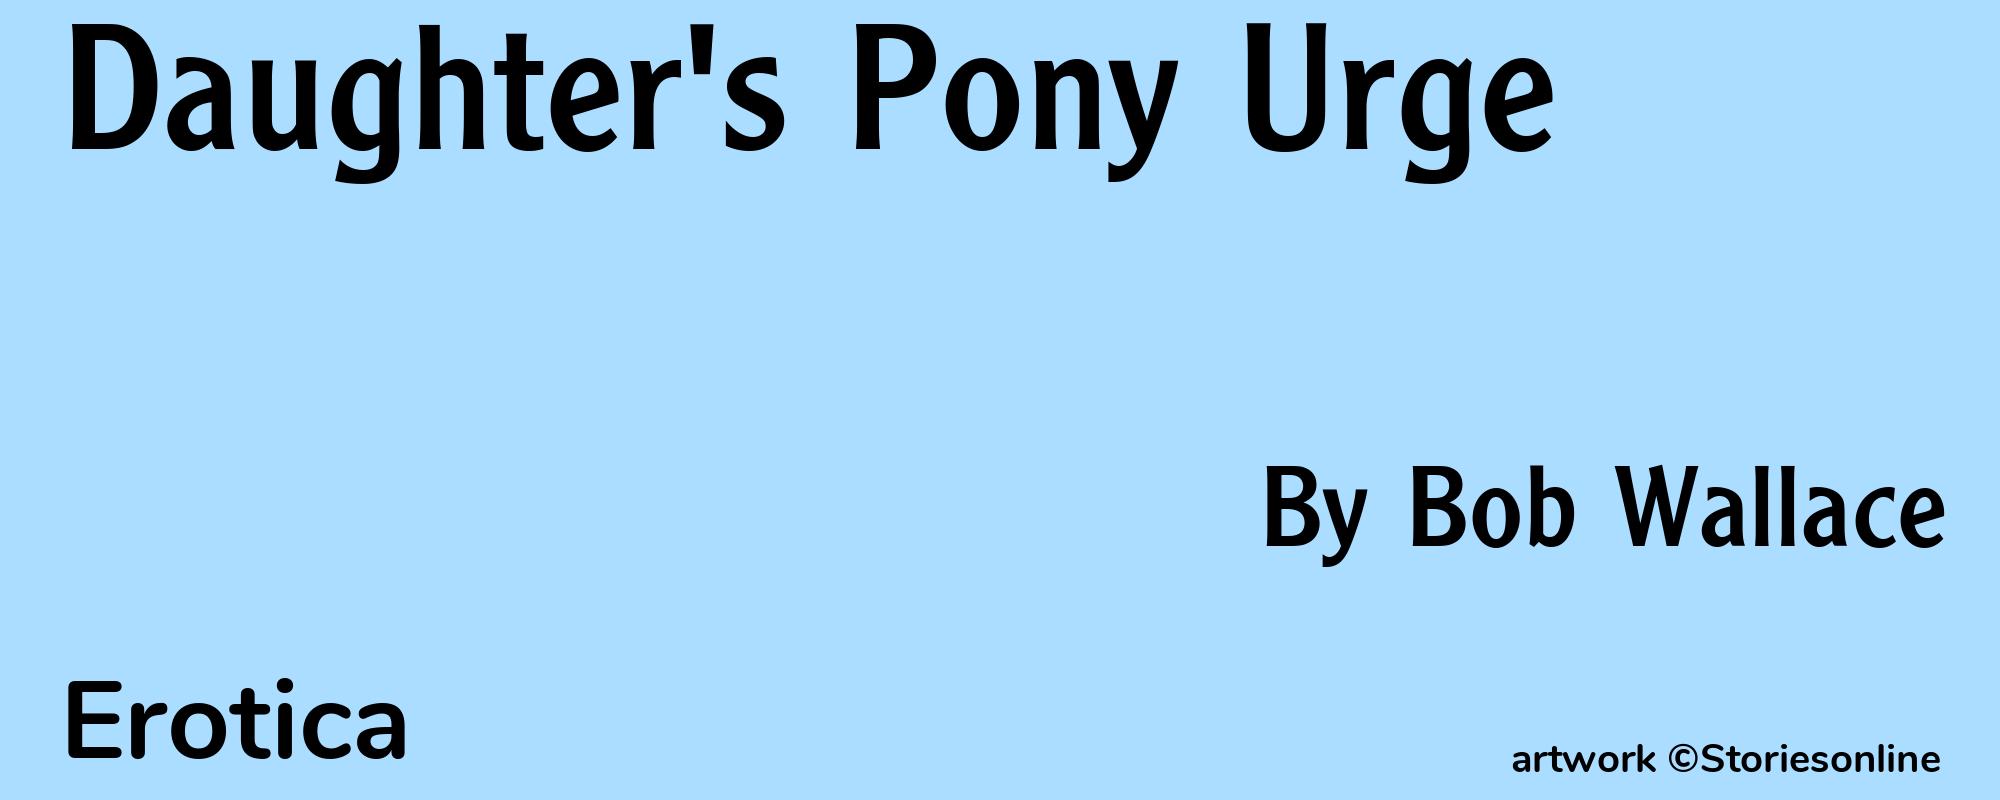 Daughter's Pony Urge - Cover